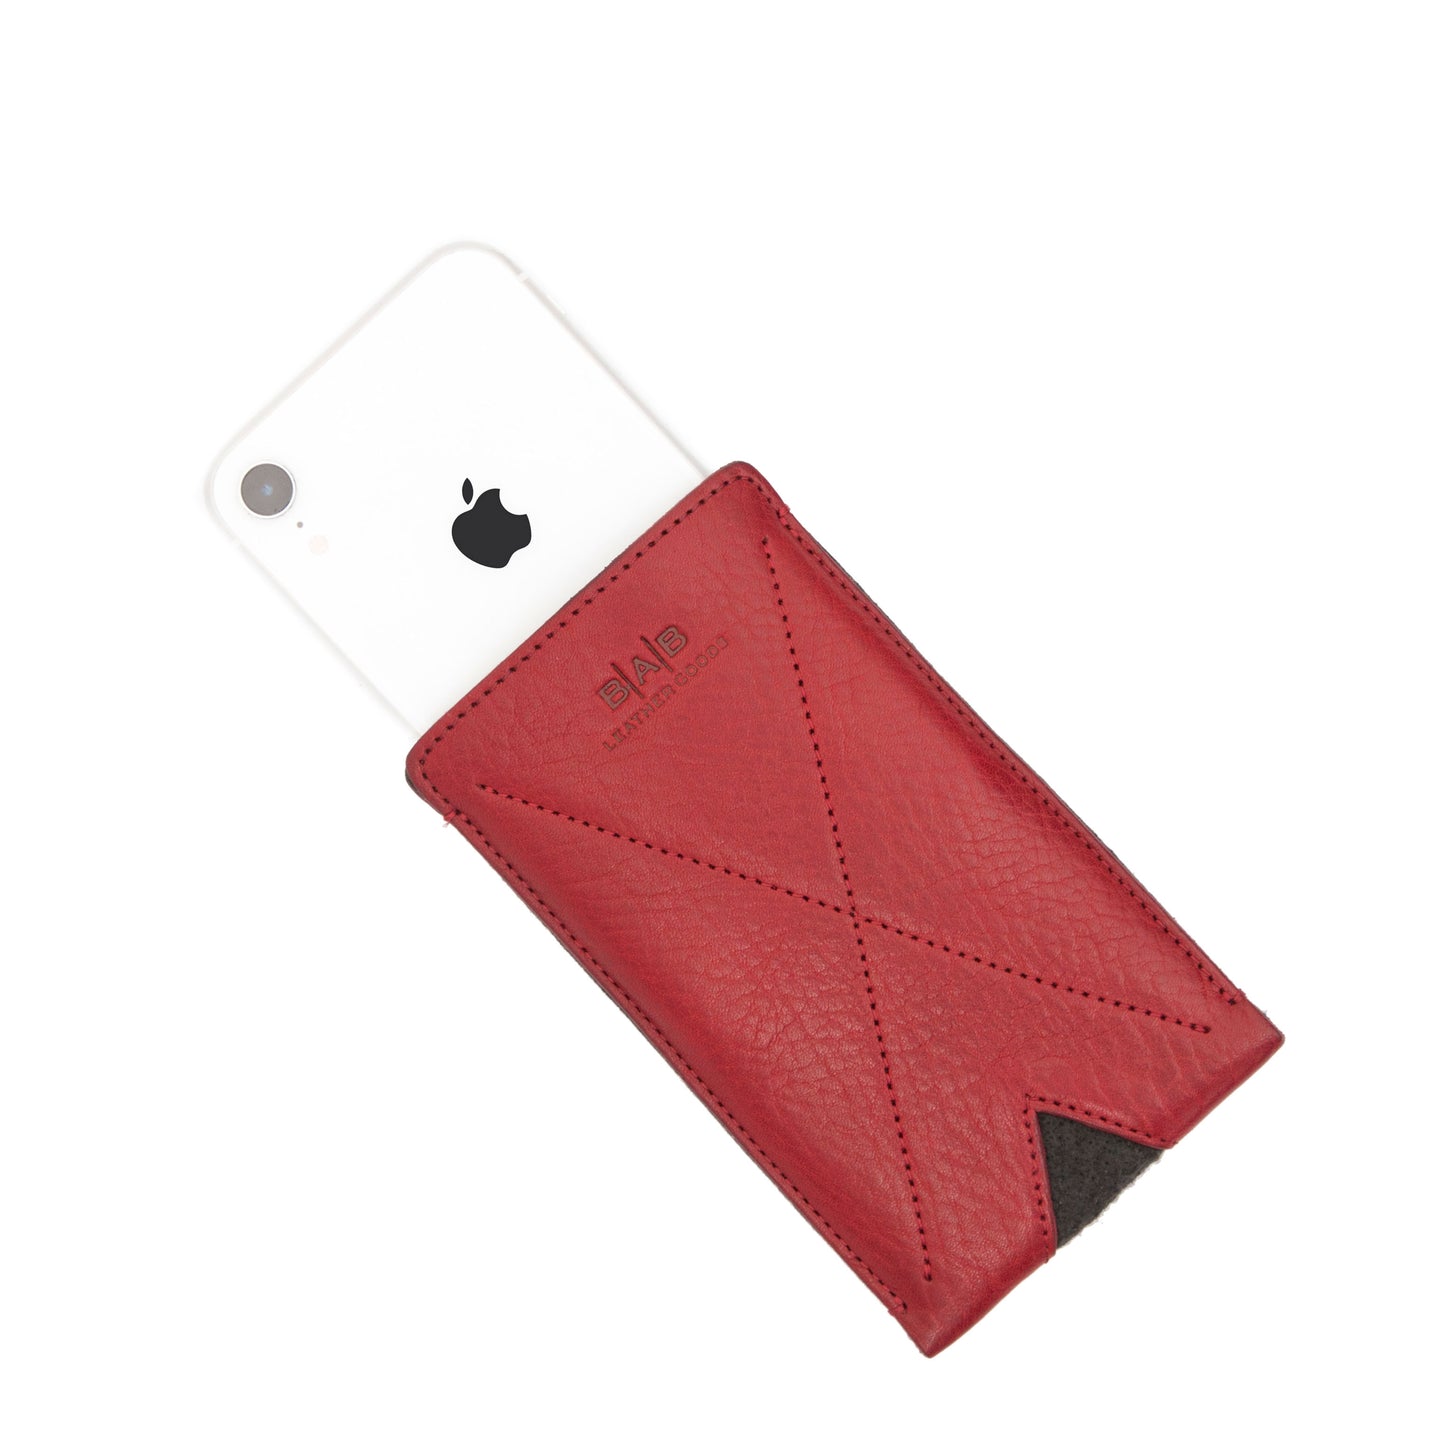 ﻿Full-Grain Genuine vegetable-tanned Leather/Felt Cover for iPhone: 6/6S-7/8-SE-12/13 Mini-X/XS-XR-11/12/13/14/15-11/12/13/14/15 Pro-XS Max-6/6S/7/8 Plus-12/13/14/15 Pro Max-14/15 Plus-Samsung: S22/S23 -S22/S23 Plus-S22/S23 Ultra.- 702.- 702